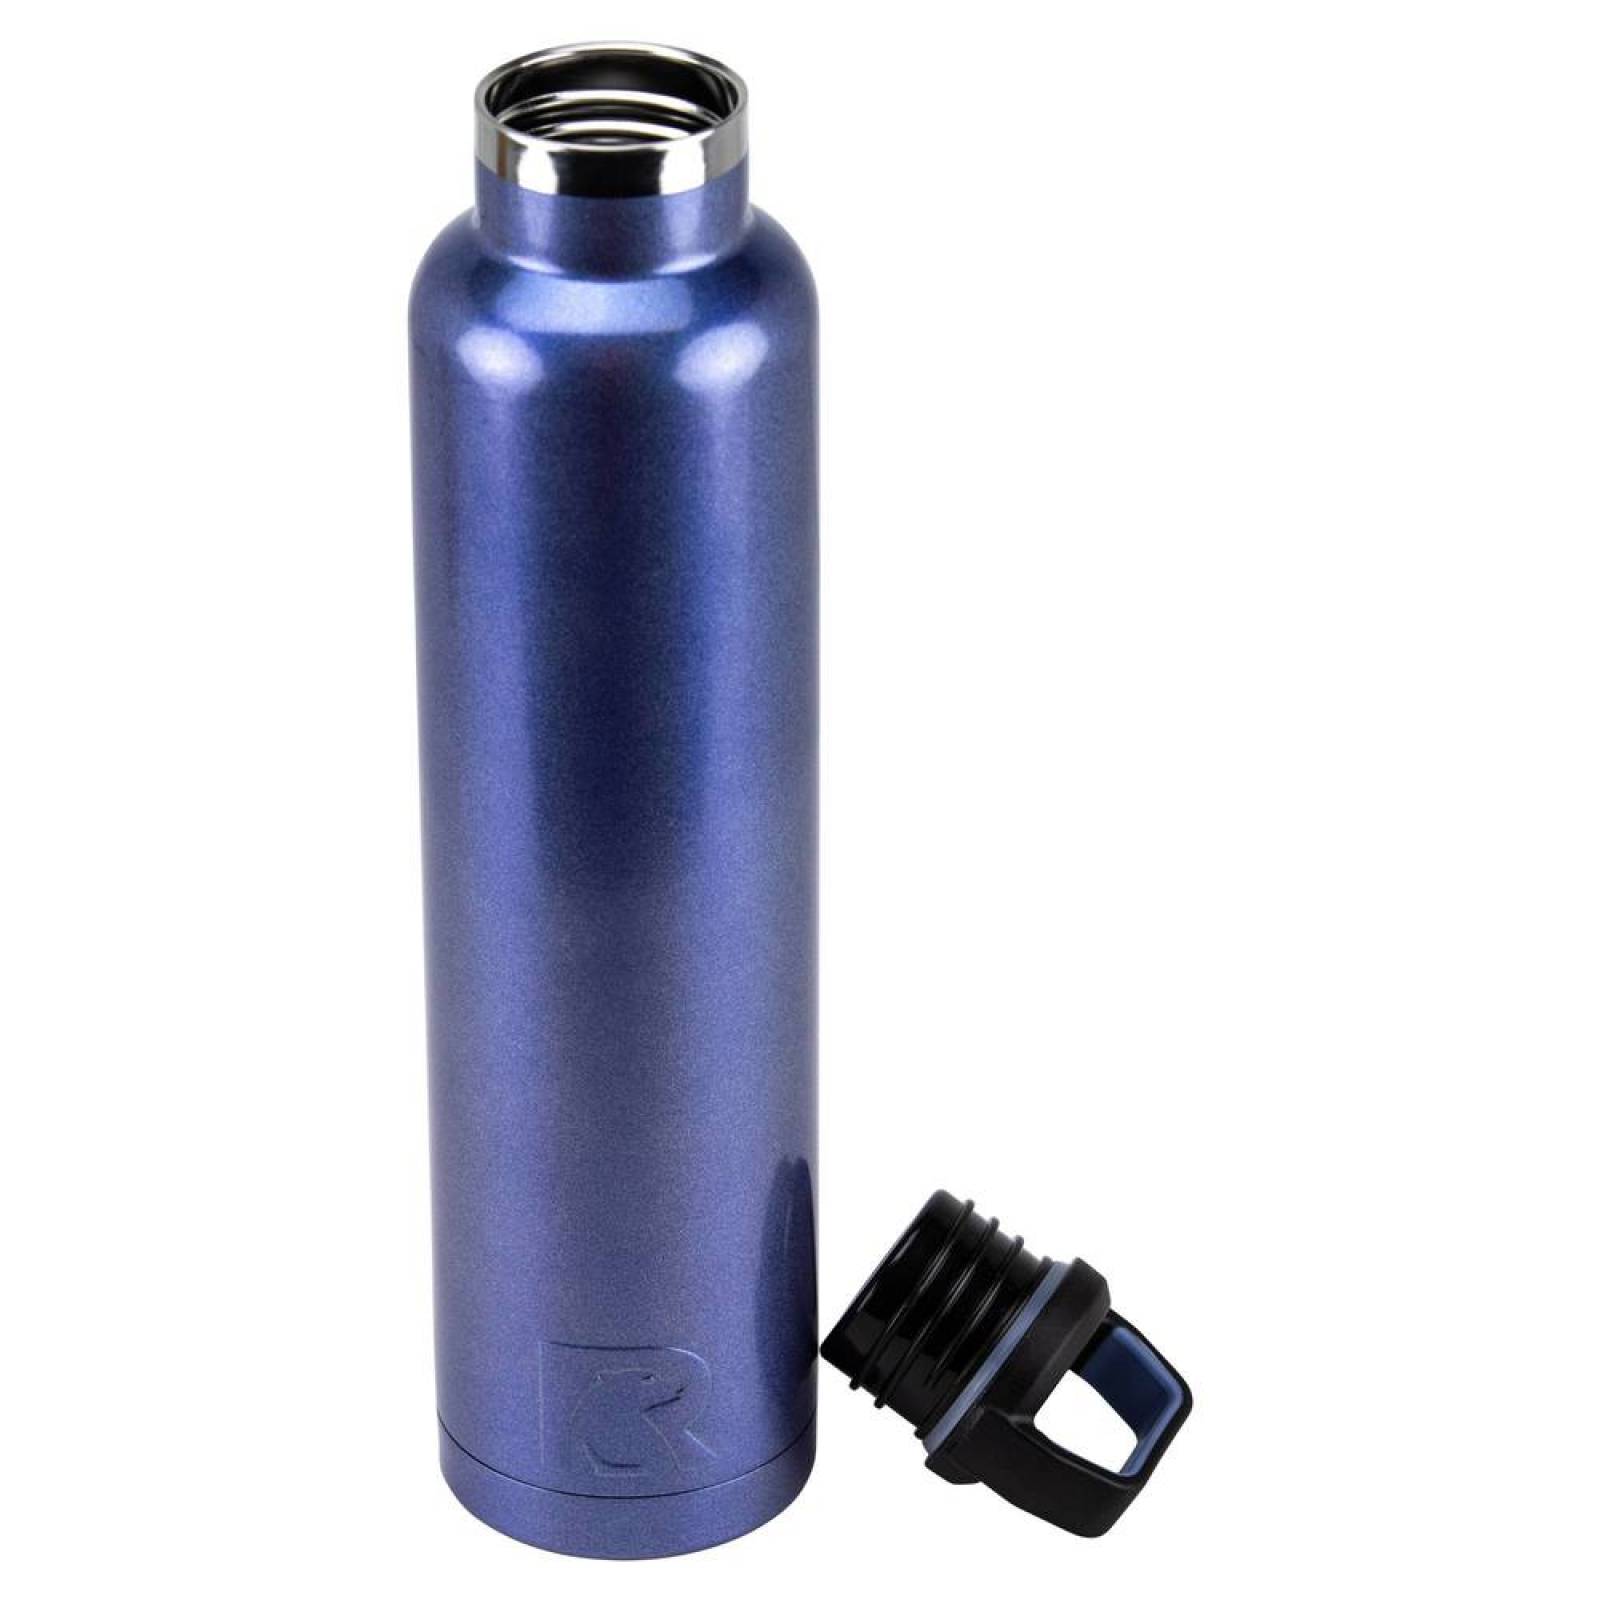 RTIC Water Bottle 26 oz. Pacific   1173